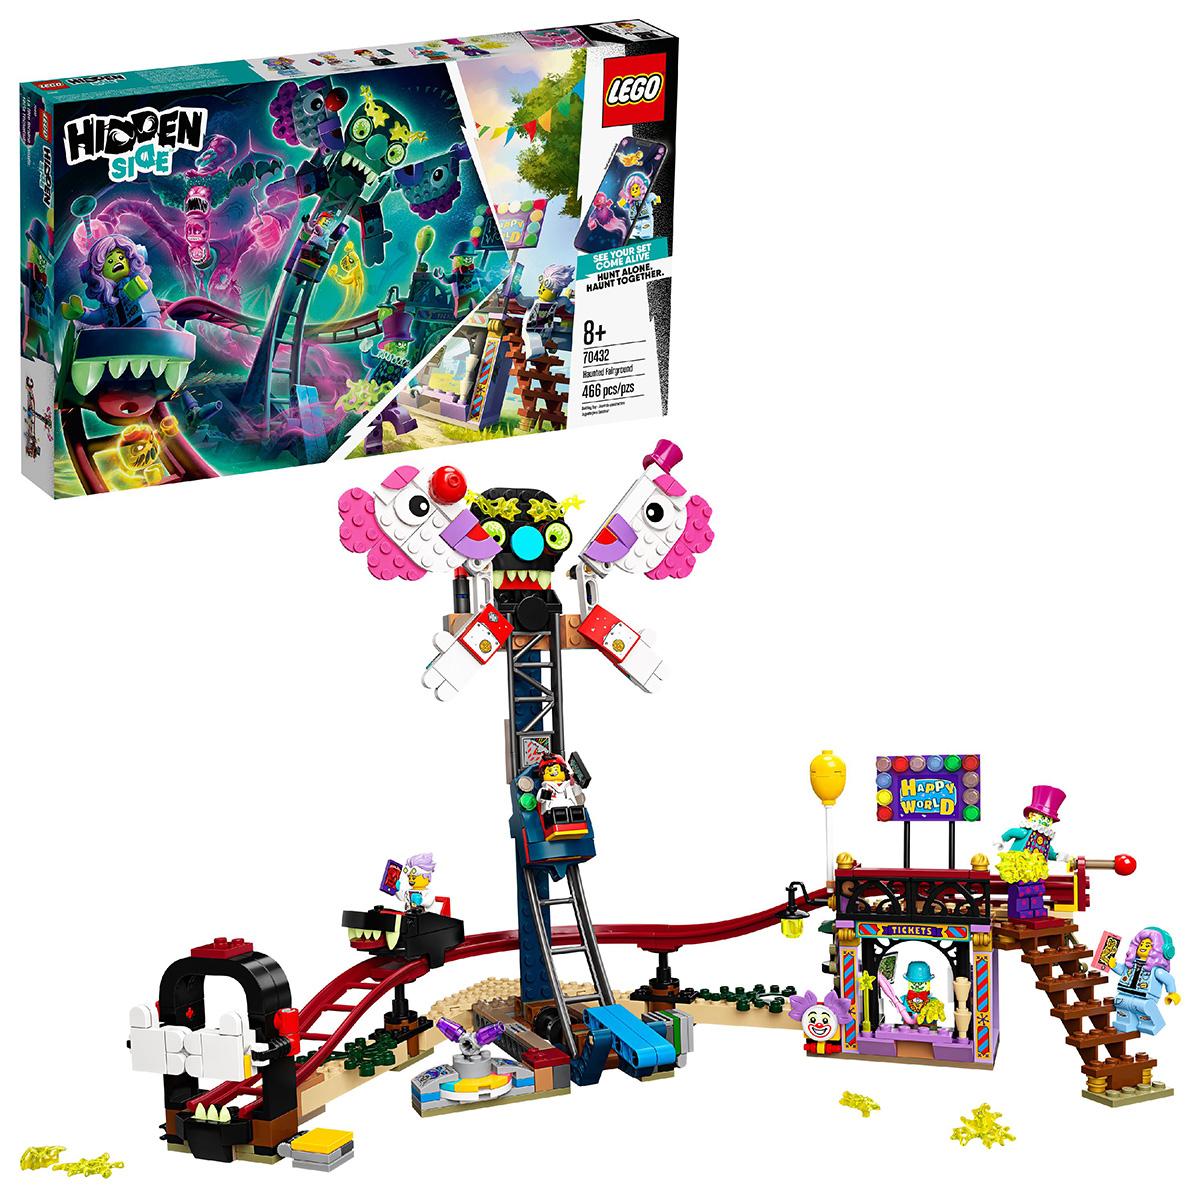 Lego Hidden Fairground Ghost-Hunting Augmented Reality Set for $34.97 Shipped